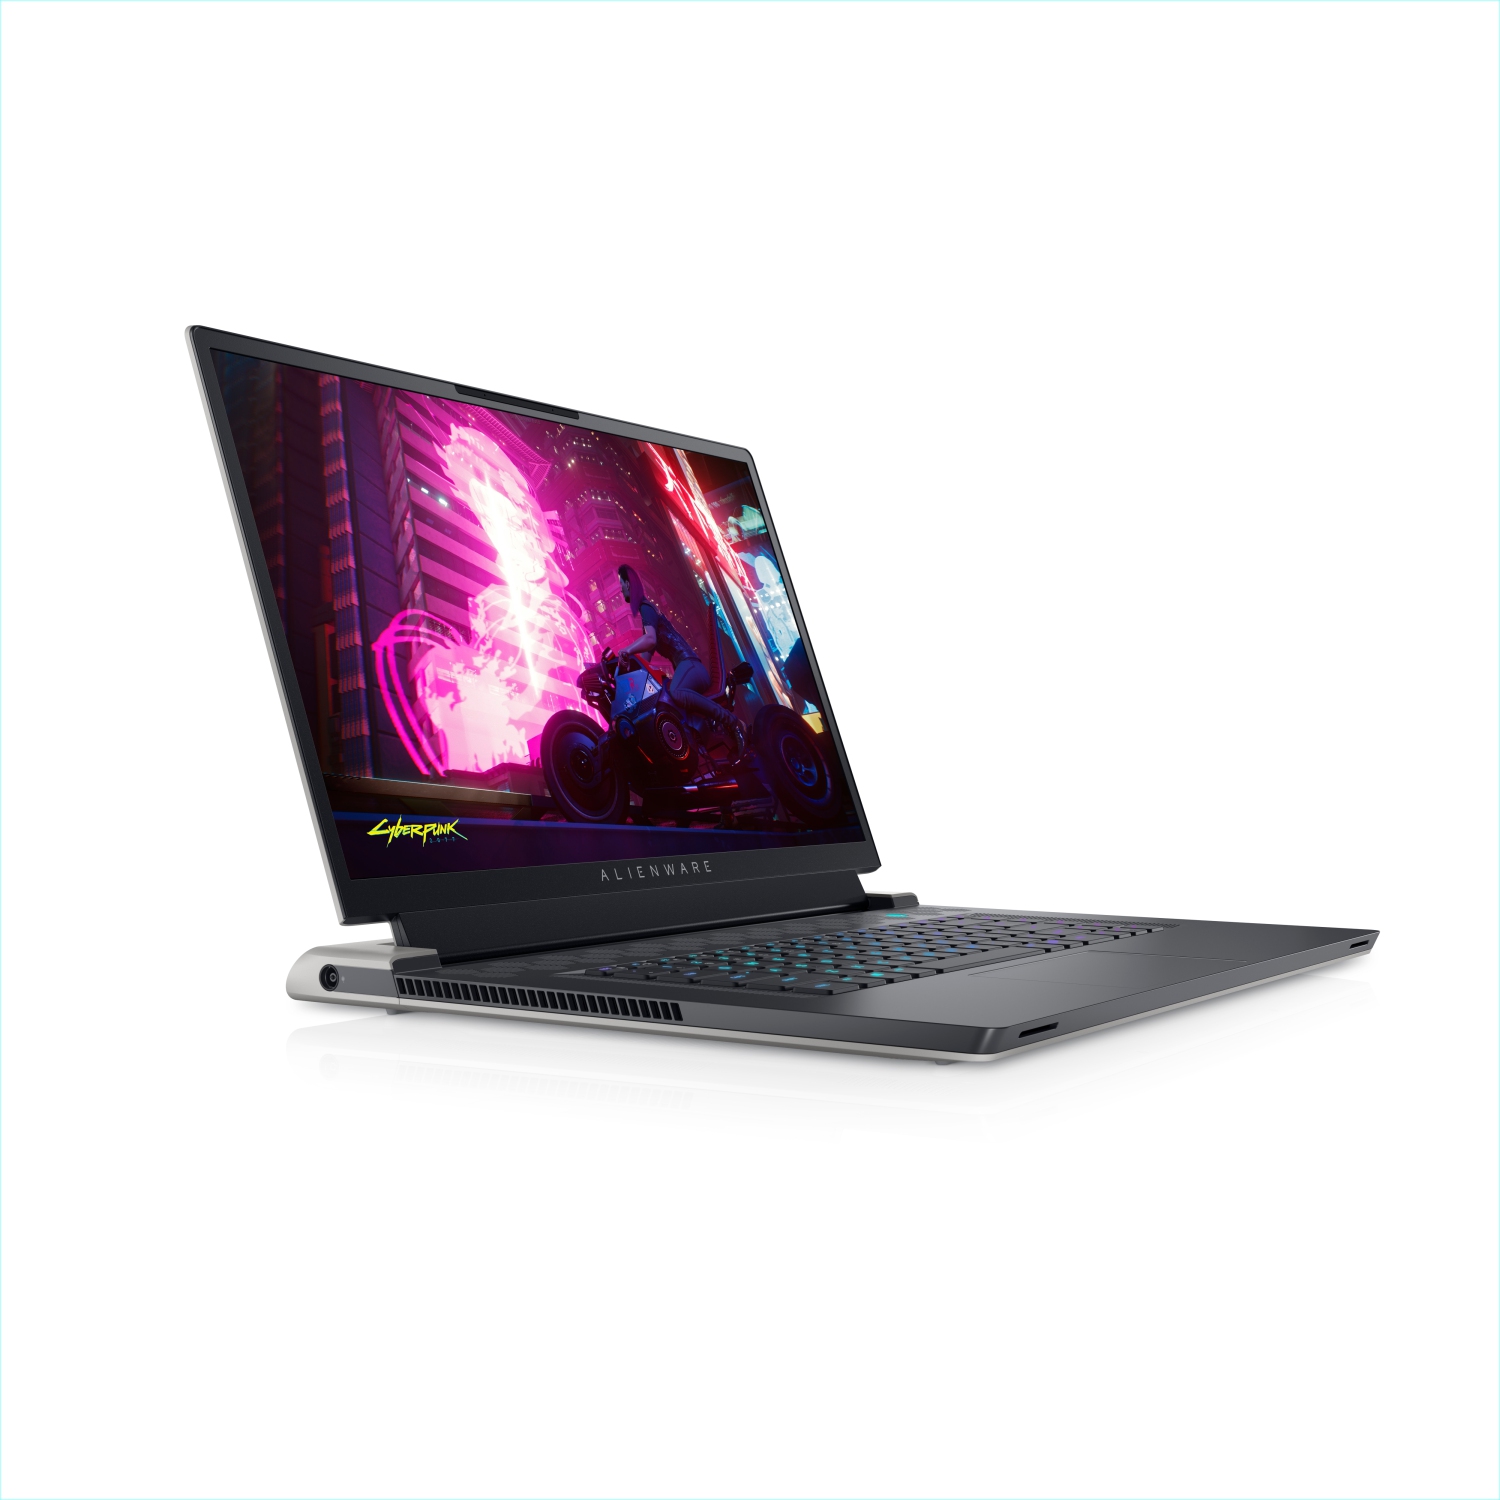 Refurbished (Excellent) – Dell Alienware X17 R1 Gaming Laptop (2021) | 17.3" FHD | Core i7 - 1TB SSD + 1TB SSD - 64GB RAM - RTX 3070 | 8 Cores @ 4.6 GHz - 11th Gen CPU - 8GB GDDR6